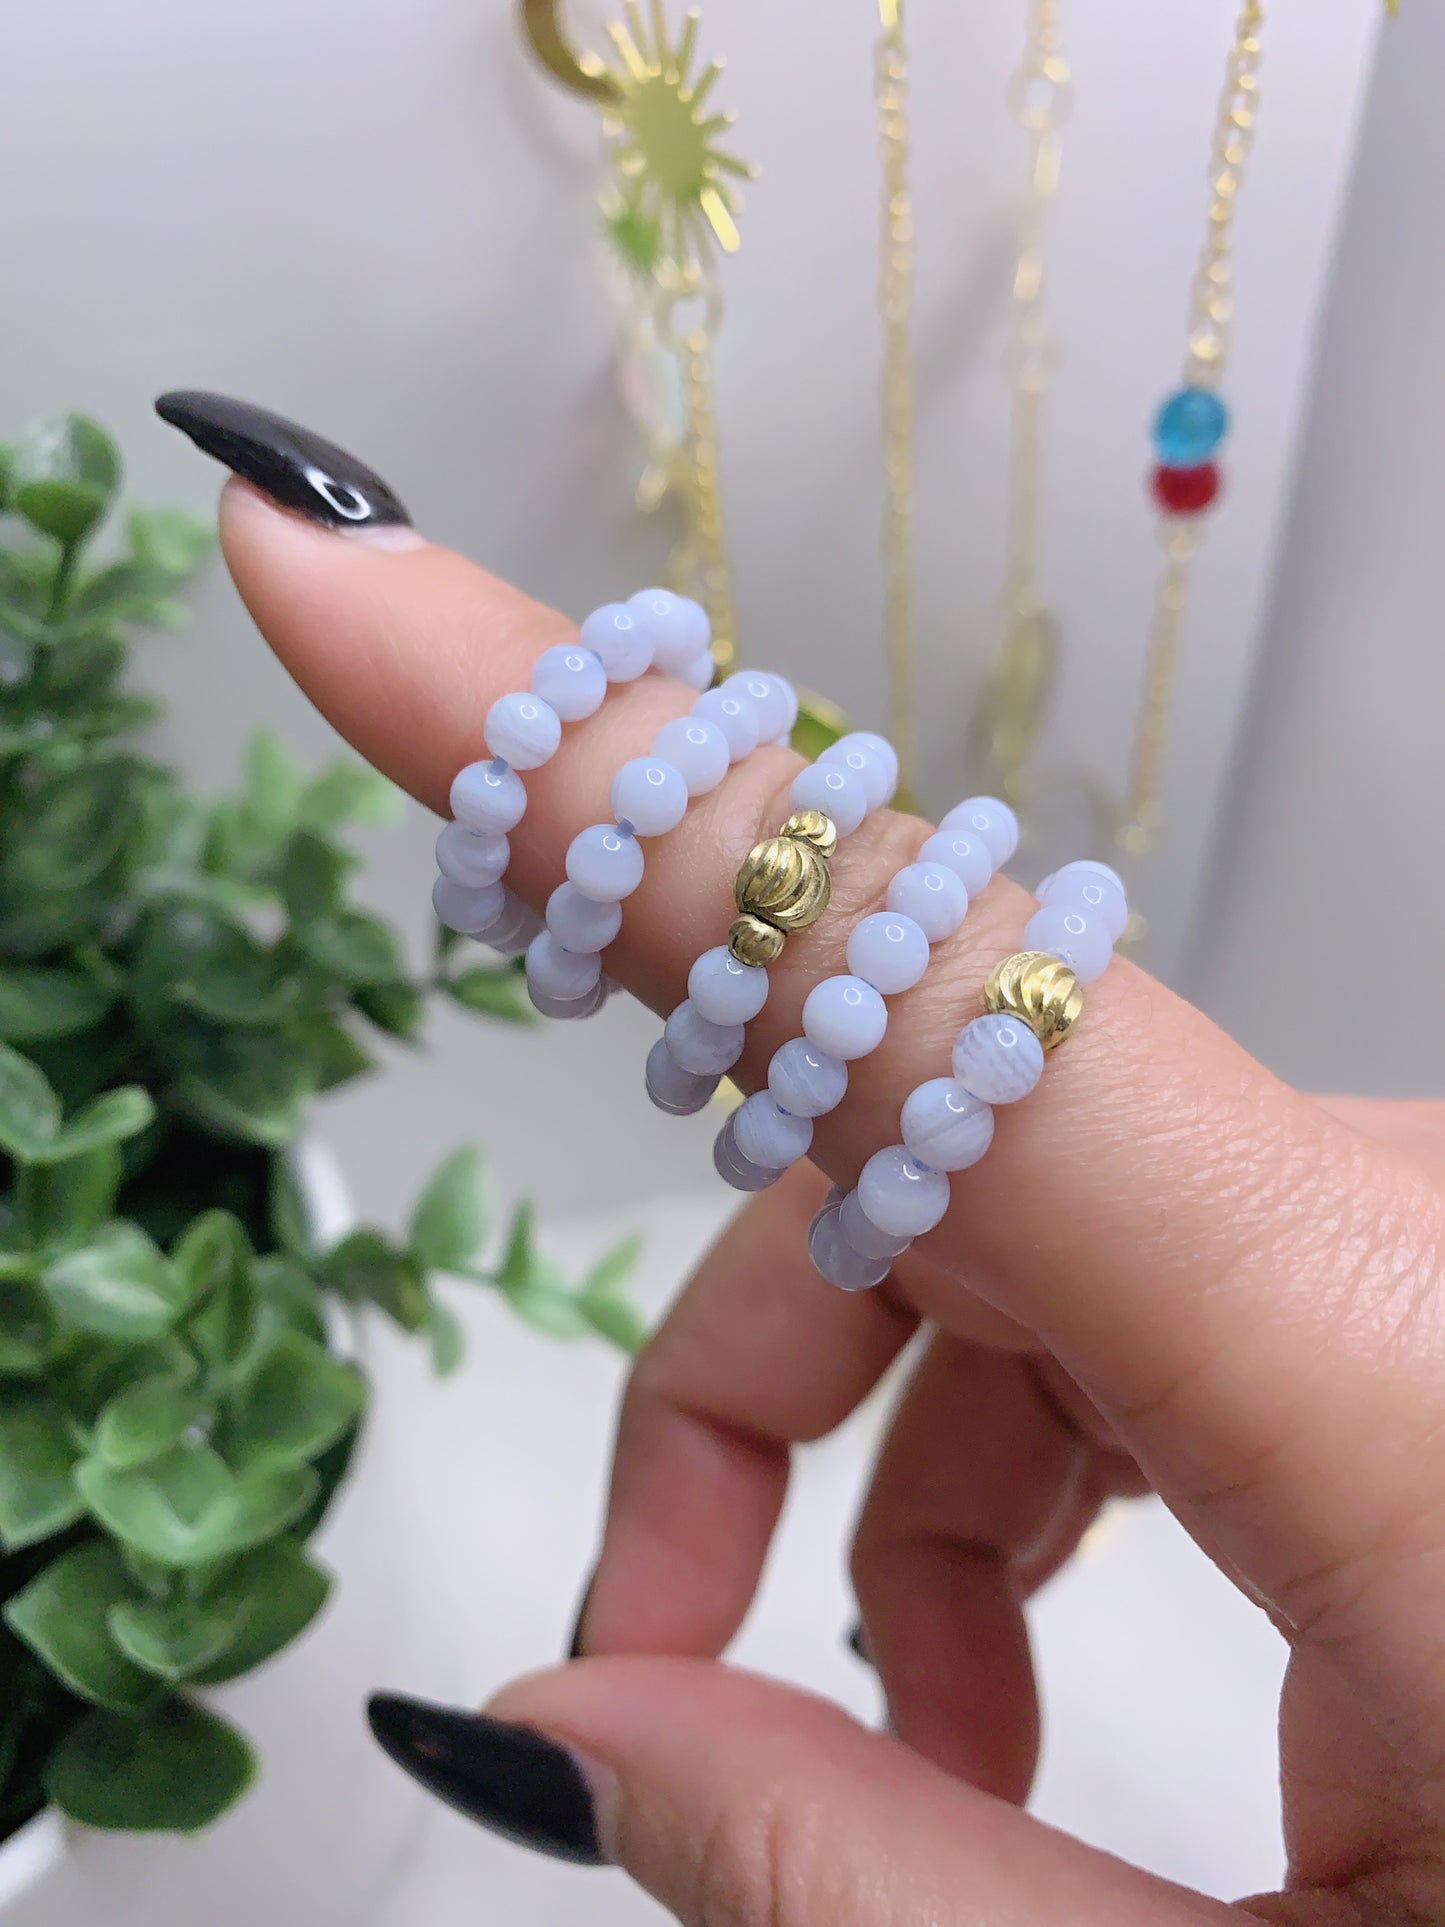 BLUE LACE AGATE CRYSTAL BEADS RING